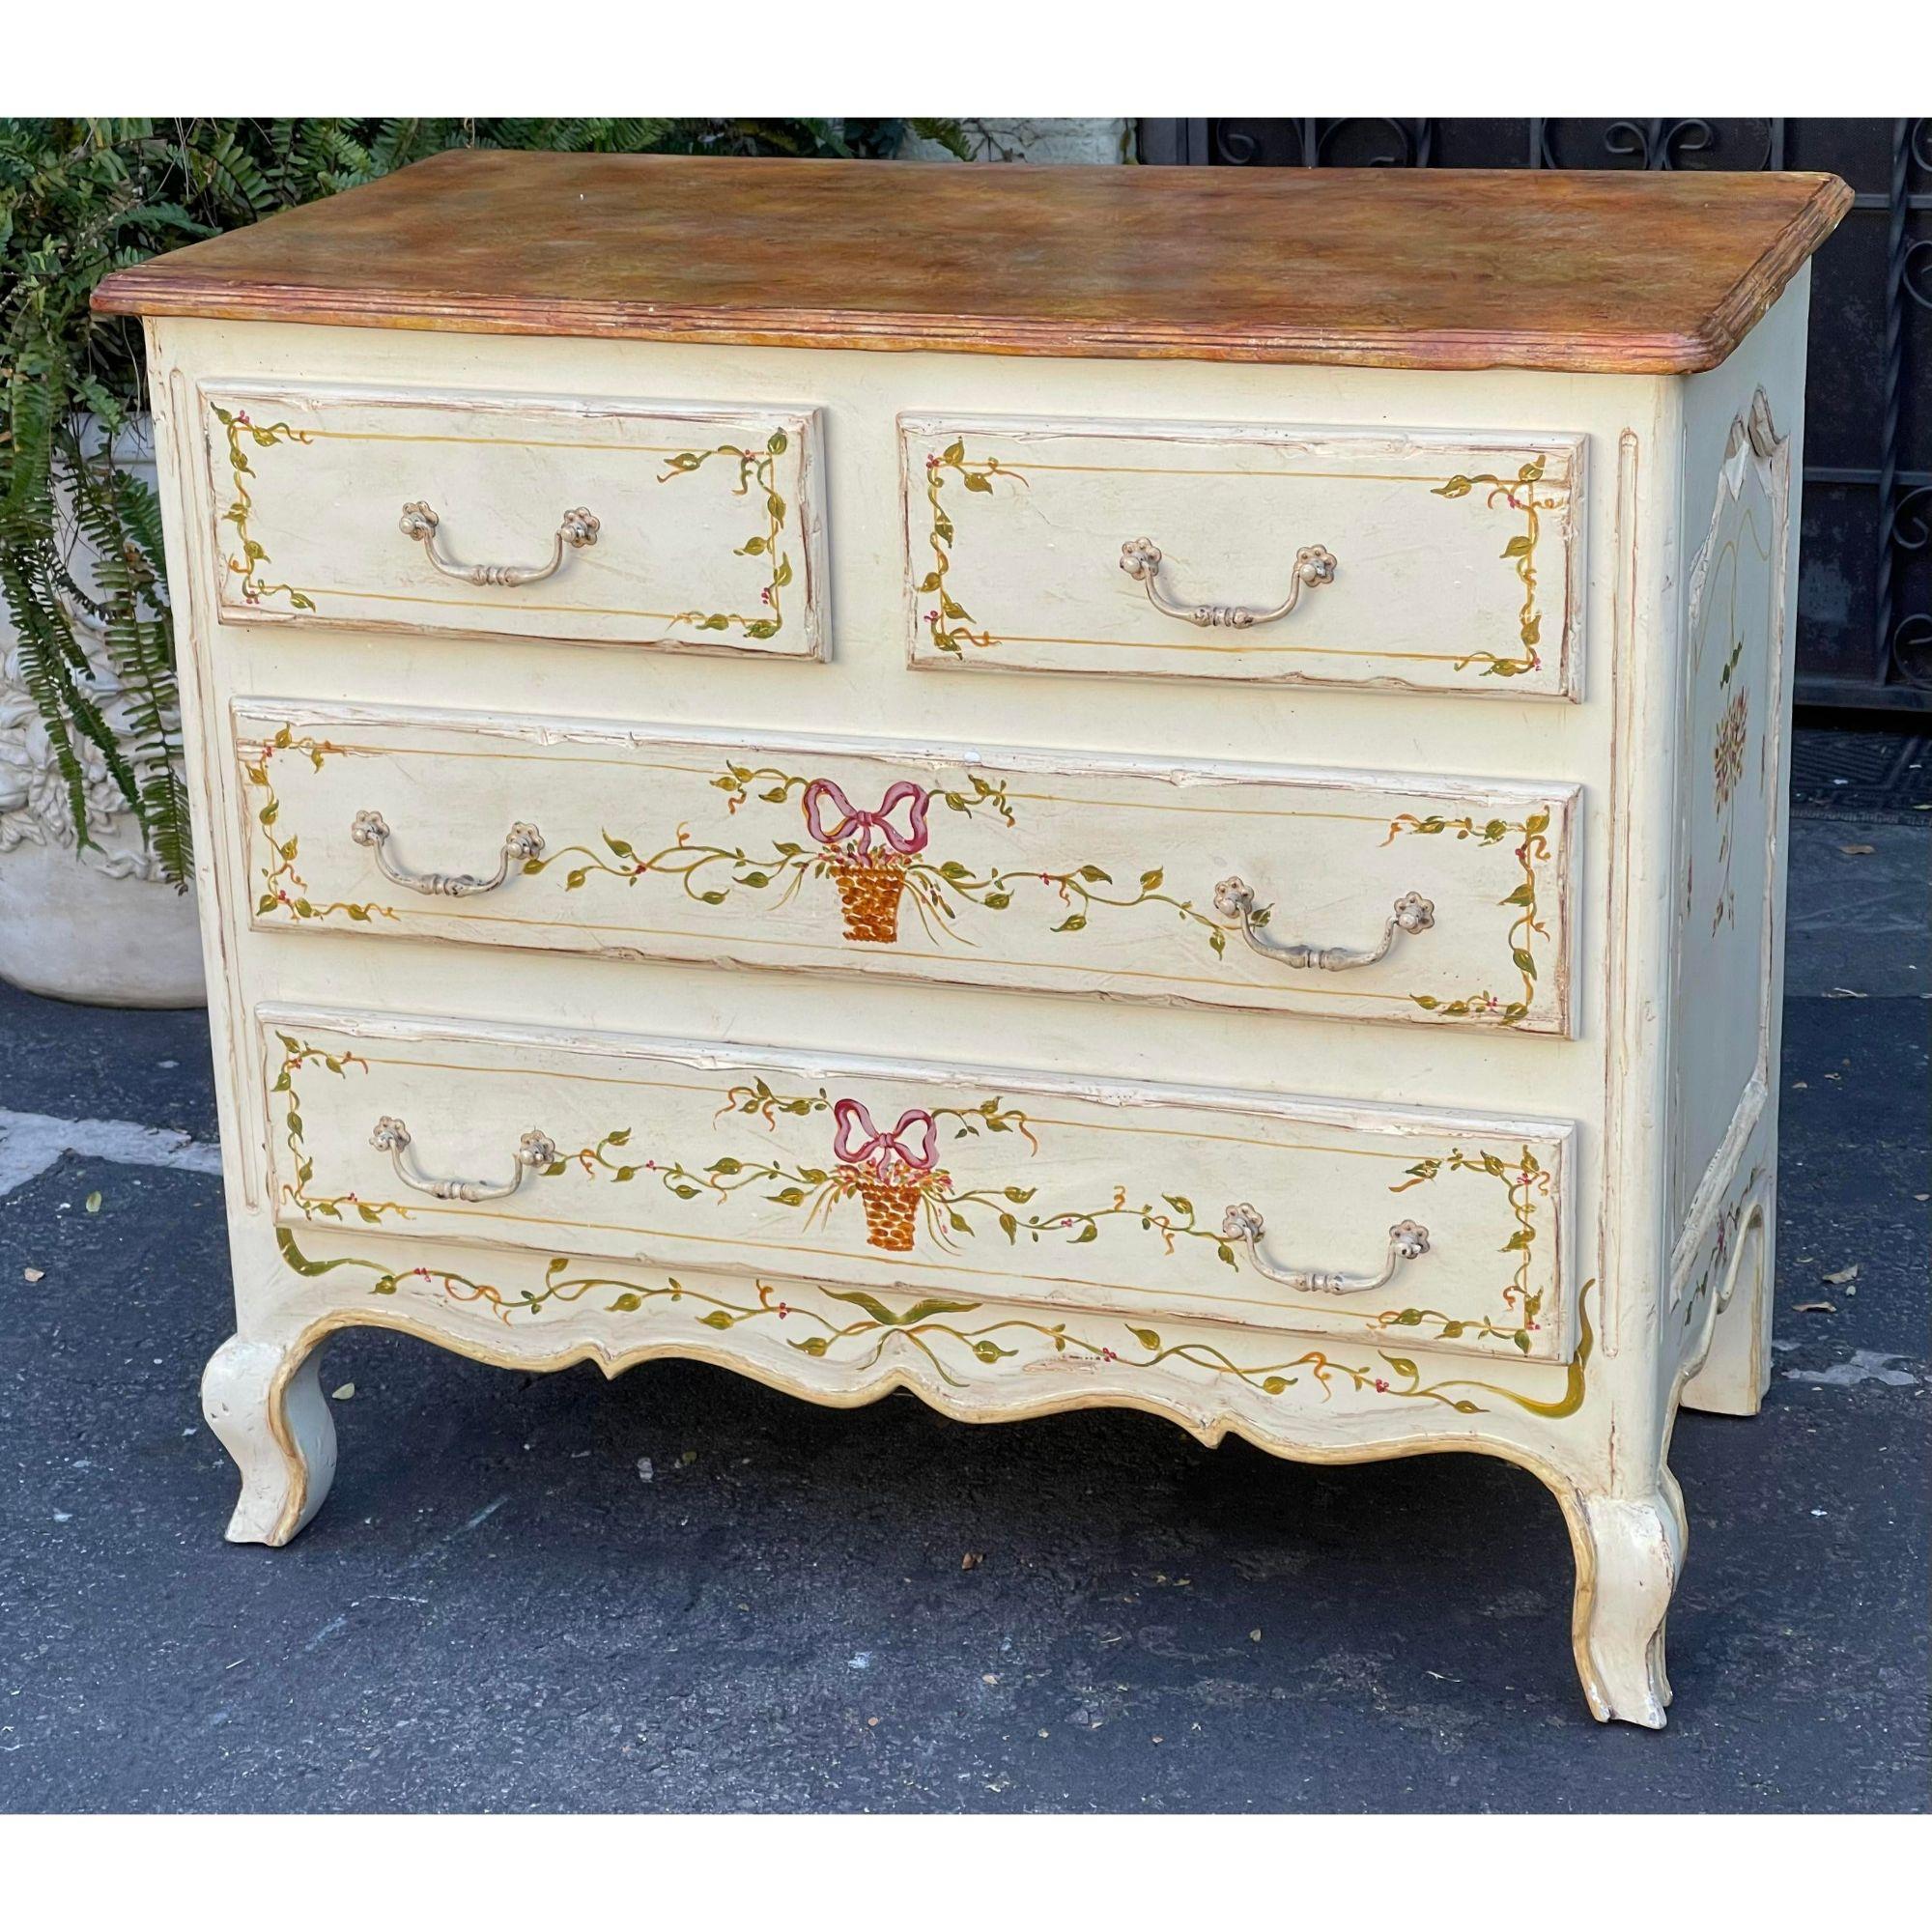 French Provincial 19th Century Style French Country Painted Chest of Drawers Commode For Sale